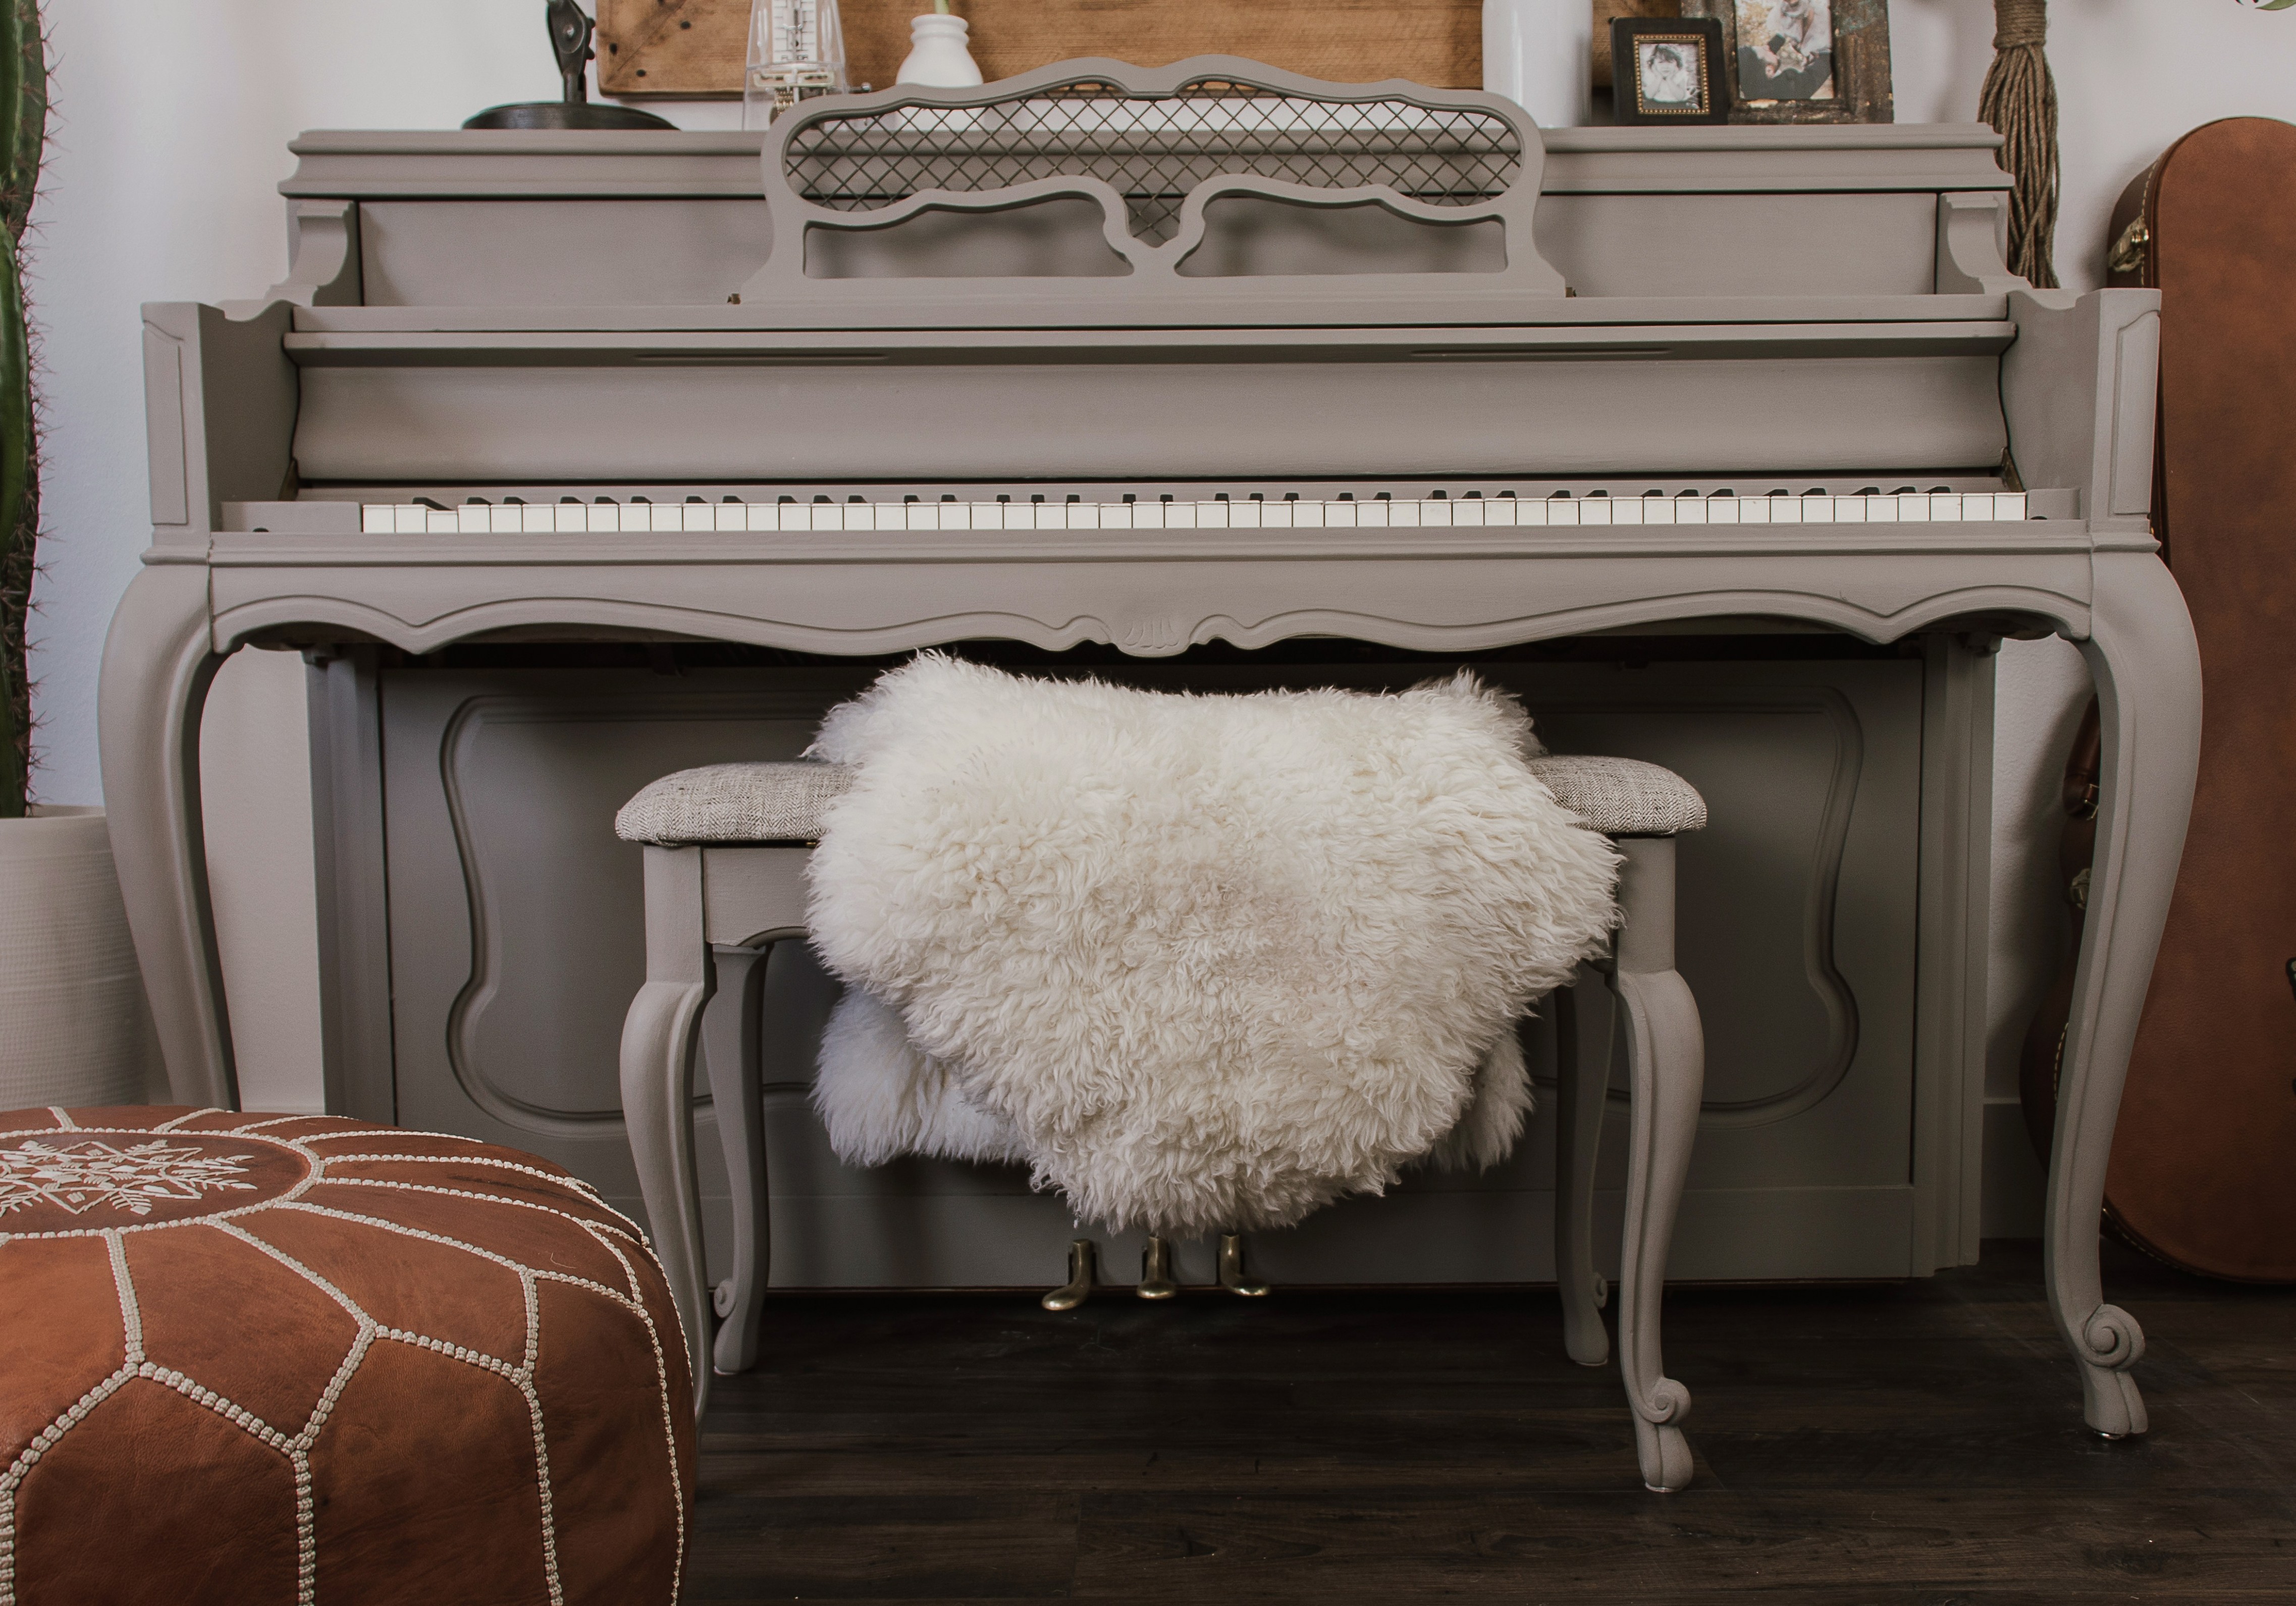 Diy: Upholstered Piano Bench – Mccoy And Co